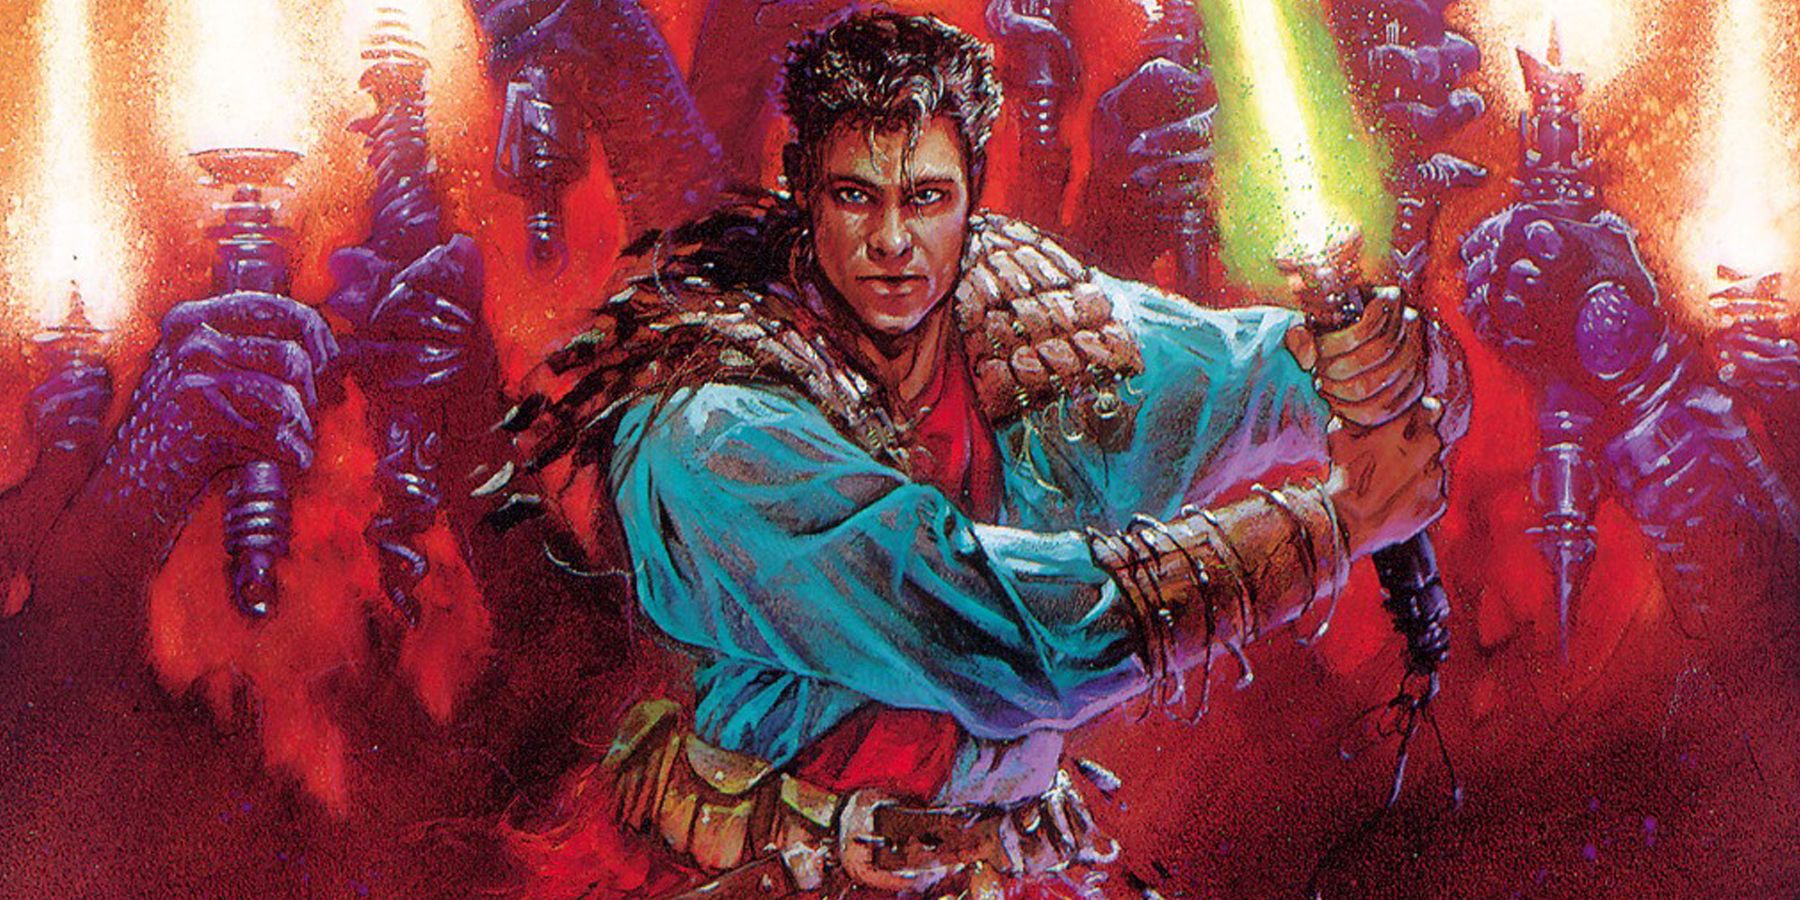 Ulic Qel-Droma wielding a lightsaber in front of a Sith Army in Star Wars comics.